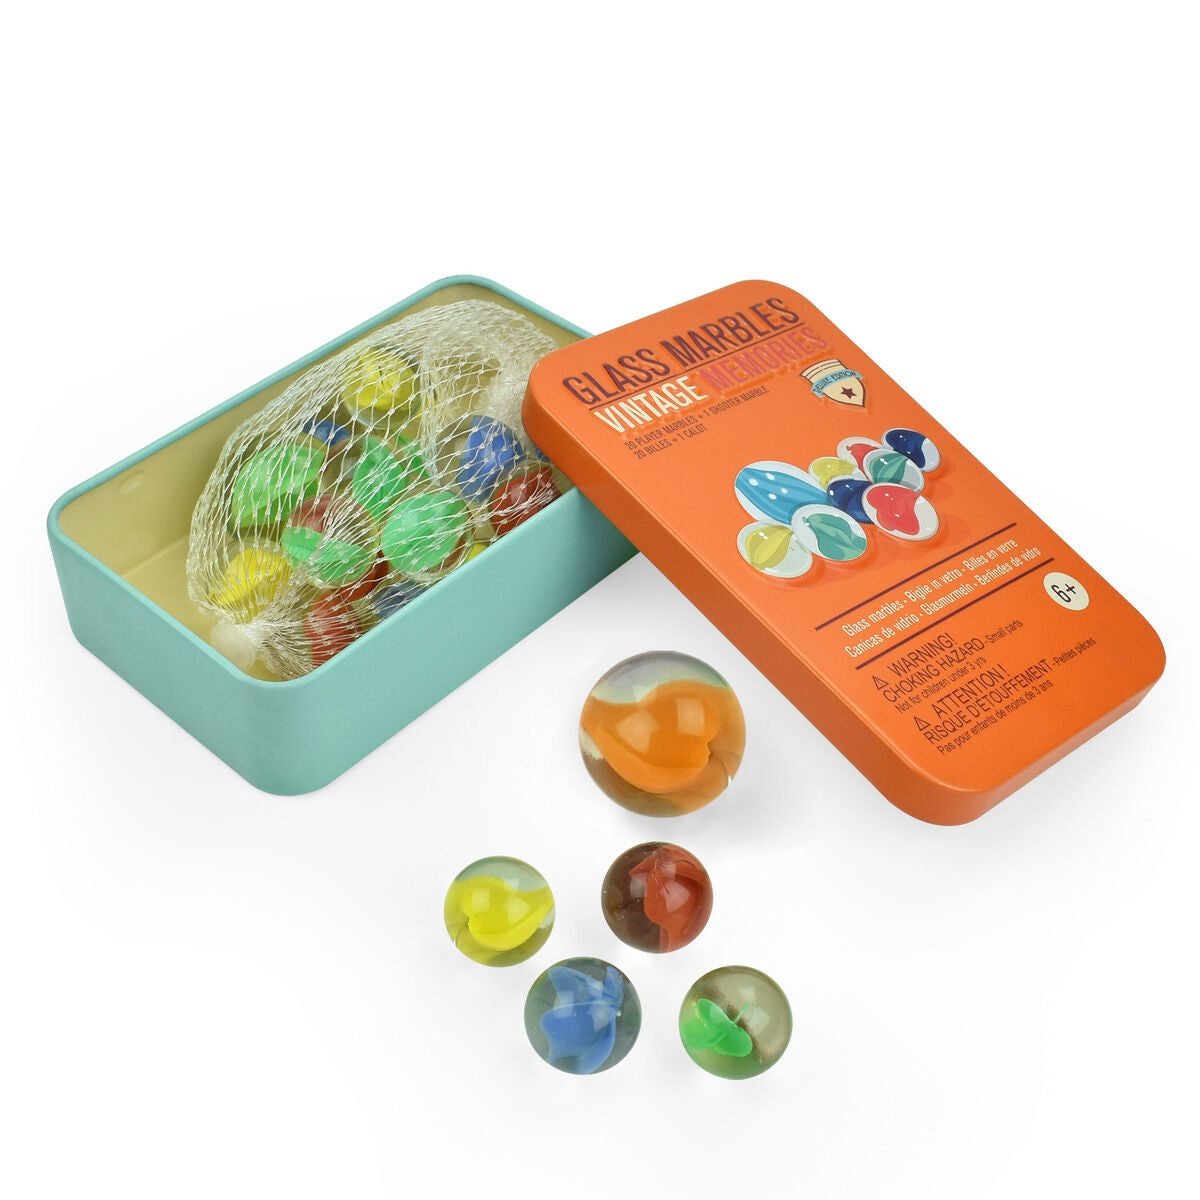 Vintage Games | Legami Vintage Games Glass Marbles by Weirs of Baggot Street